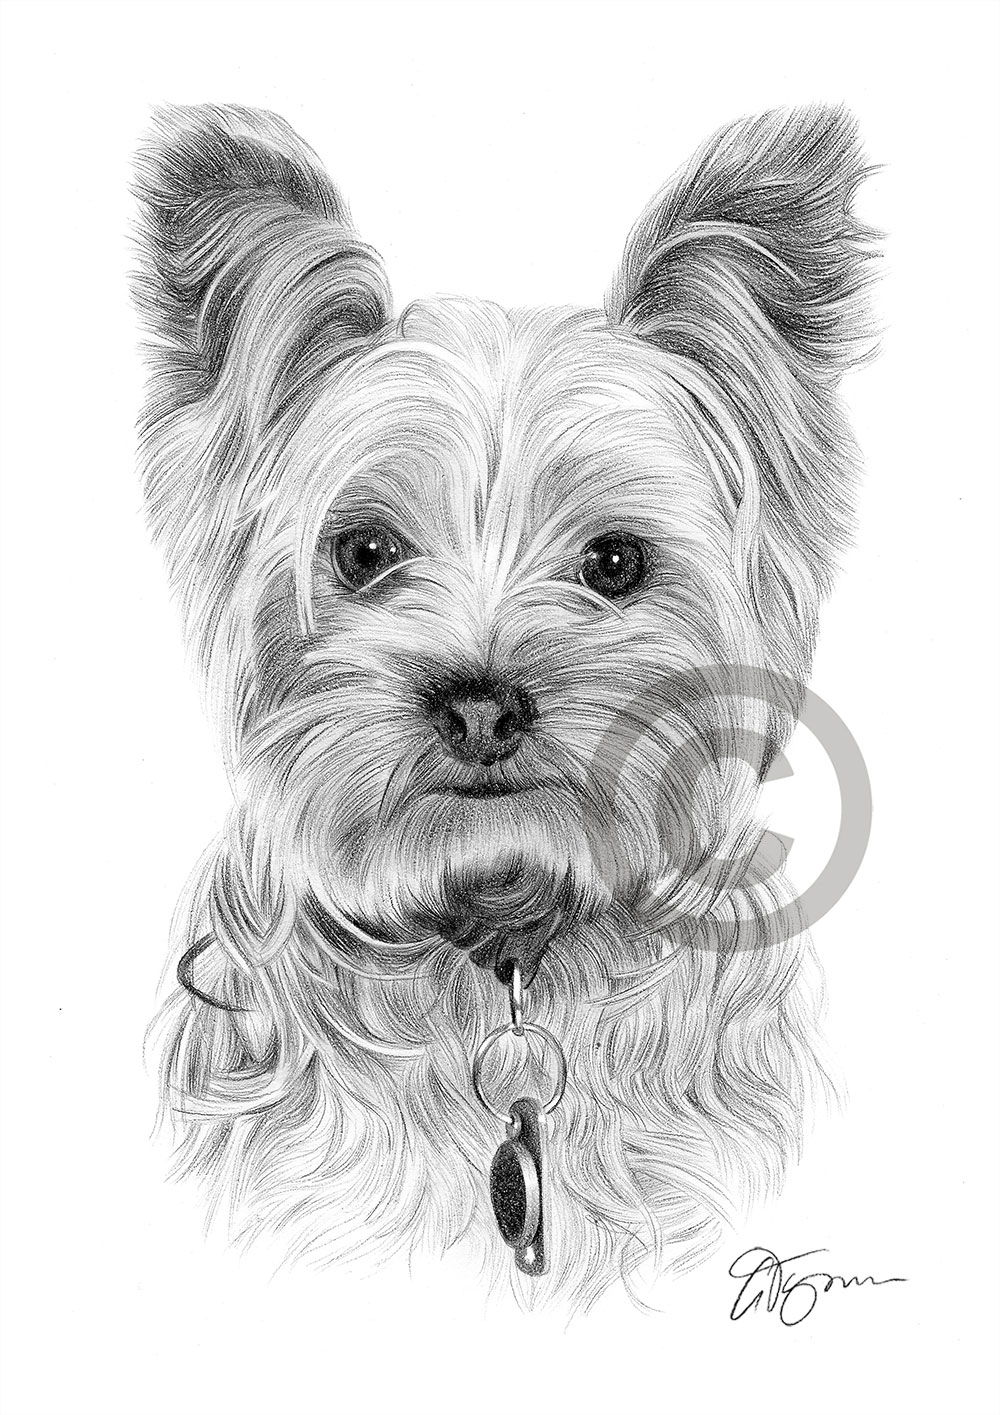 YORKSHIRE TERRIER art print A4 / A3 sizes pencil drawing artwork Yorkie